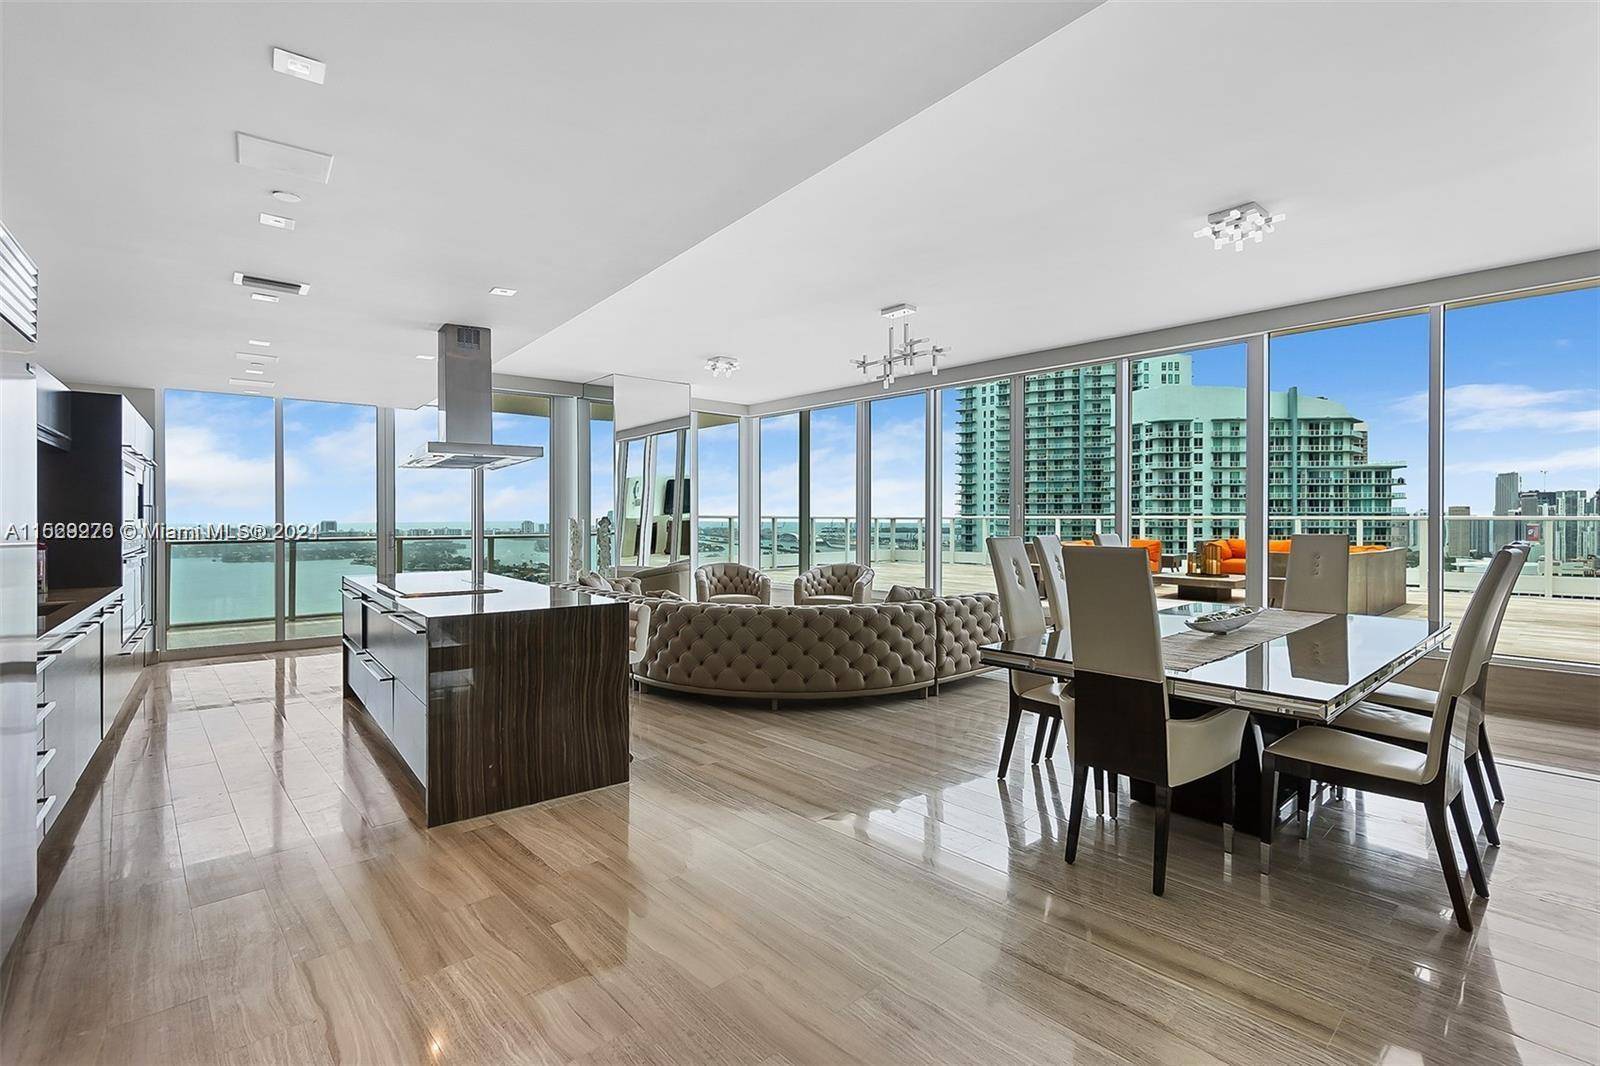 An absolute one of a kind designer Penthouse perched over Biscayne bay with sweeping 270 degree views from the Miami Beach shoreline to the downtown skyline ; from Coconut Grove ...